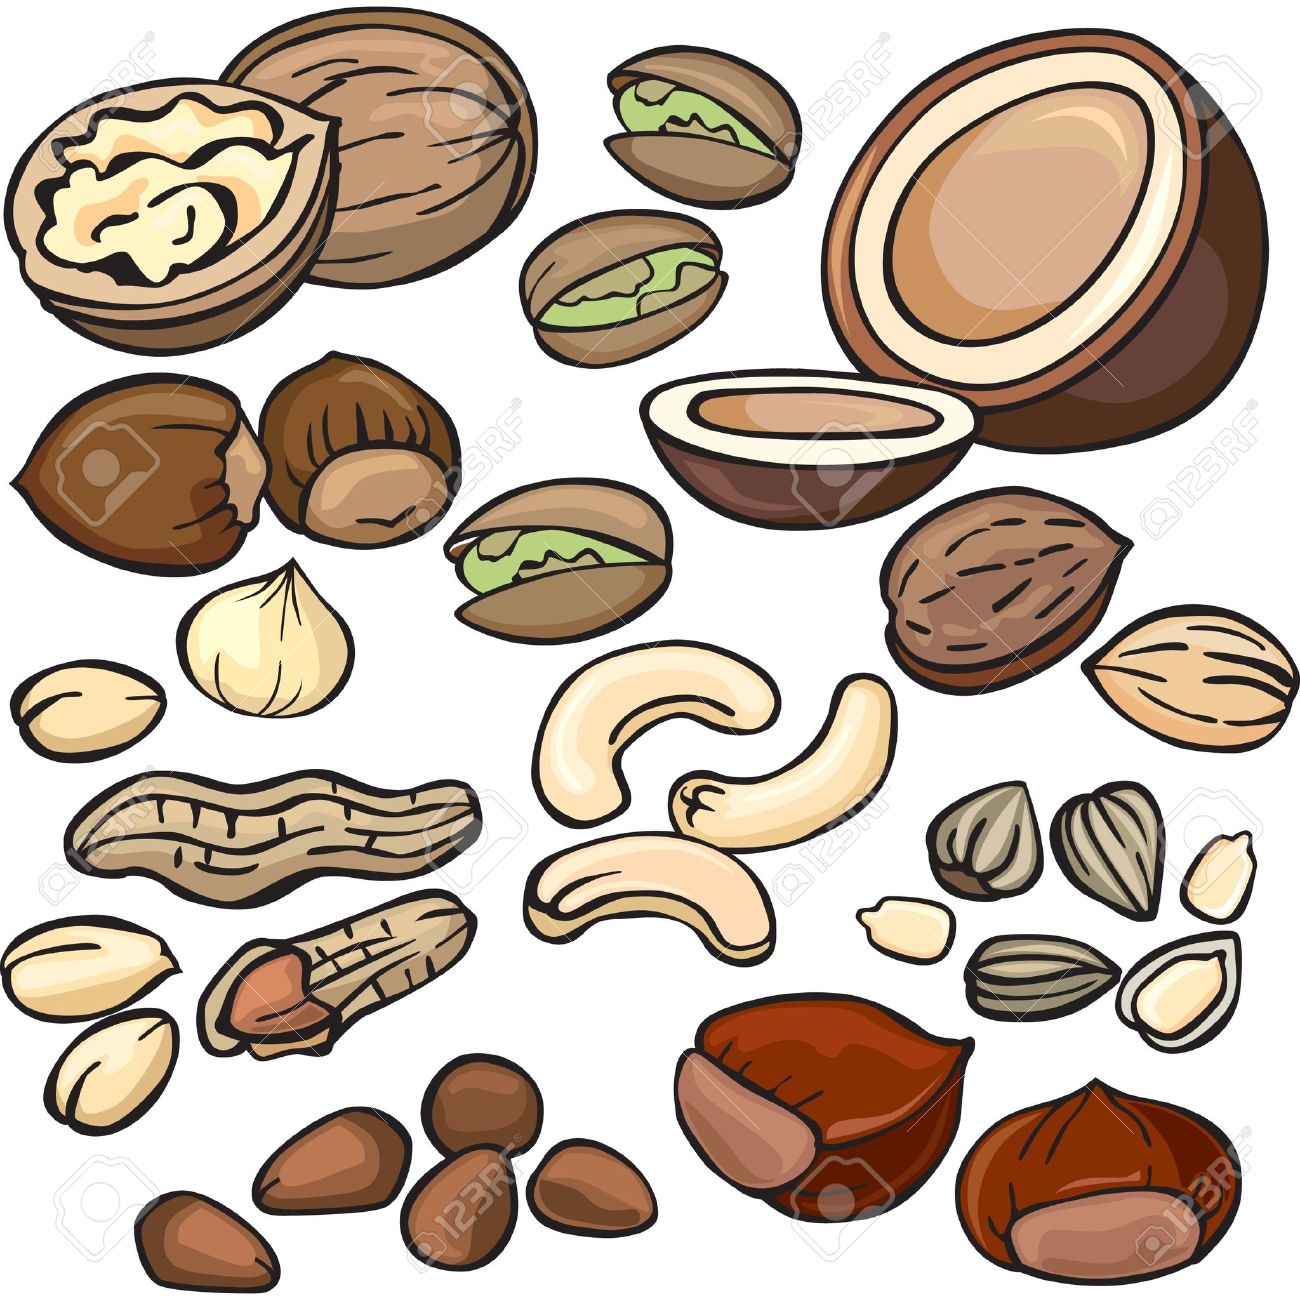 nut clipart